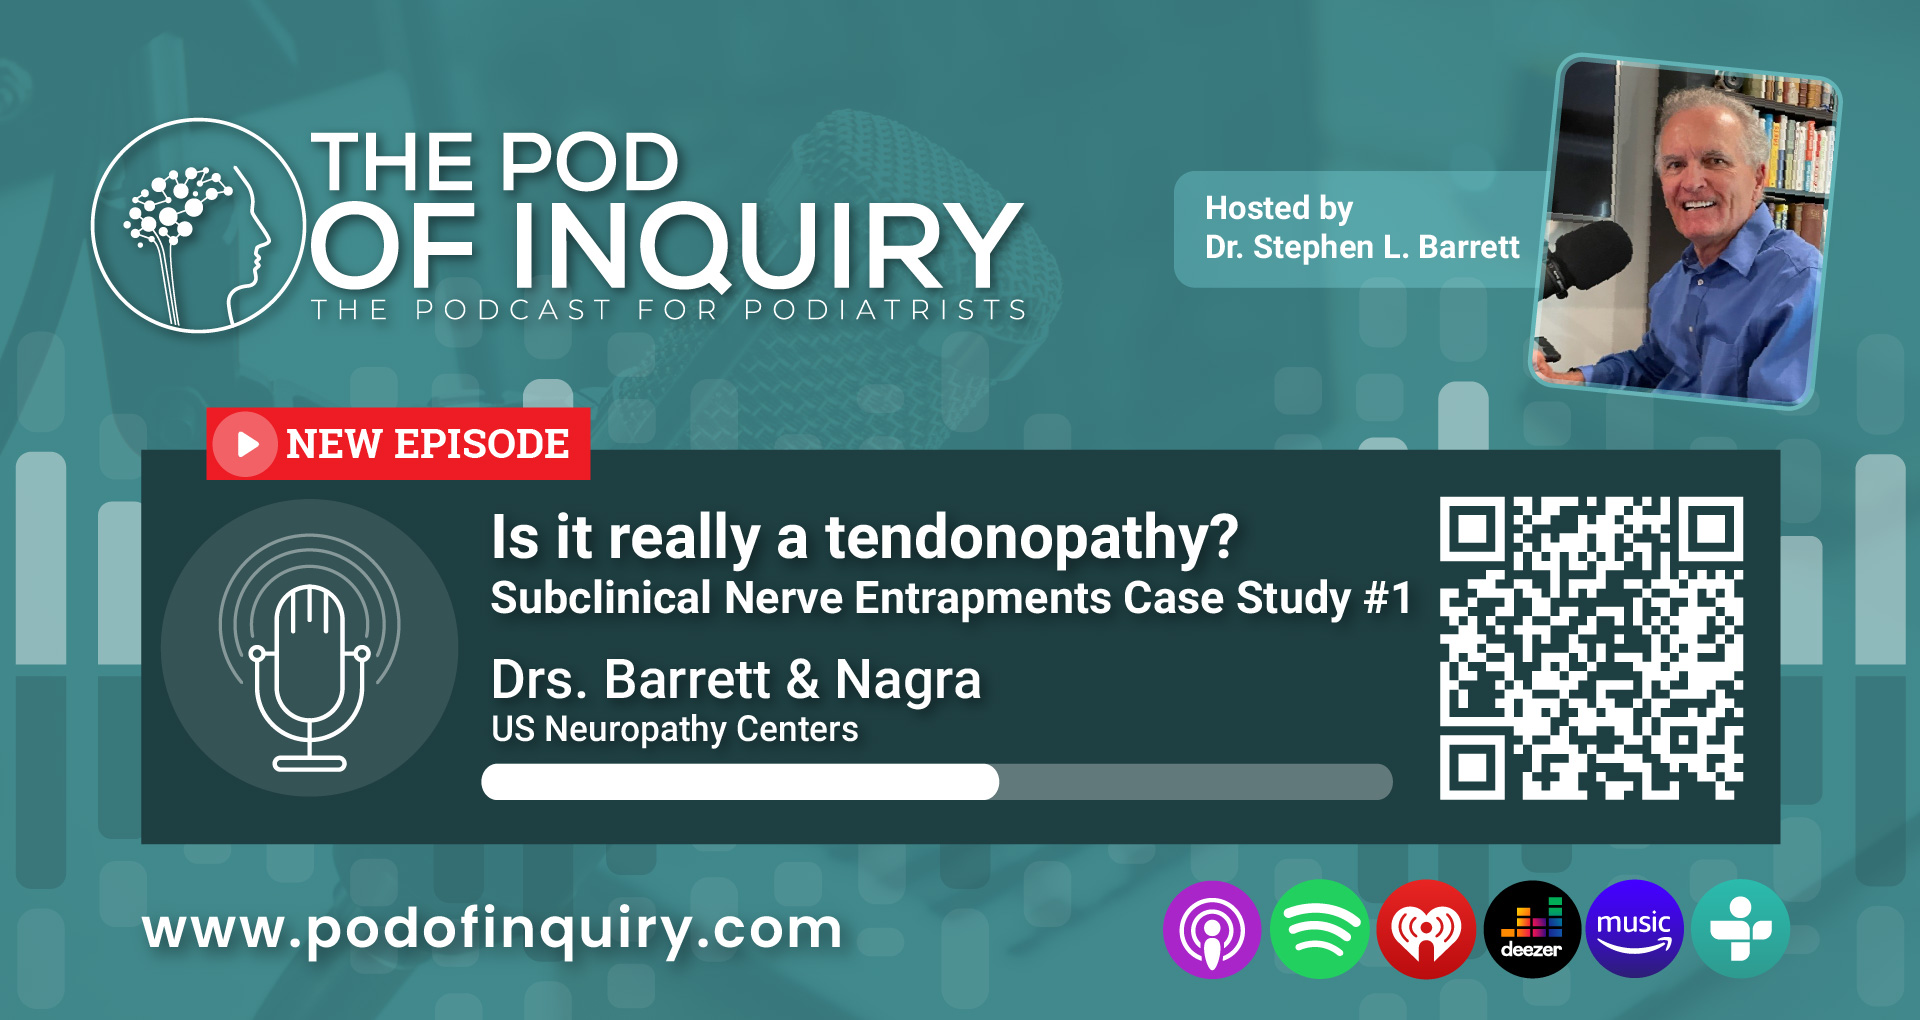 Is it really a tendonopathy? Subclinical Nerve Entrapments Case Study #1